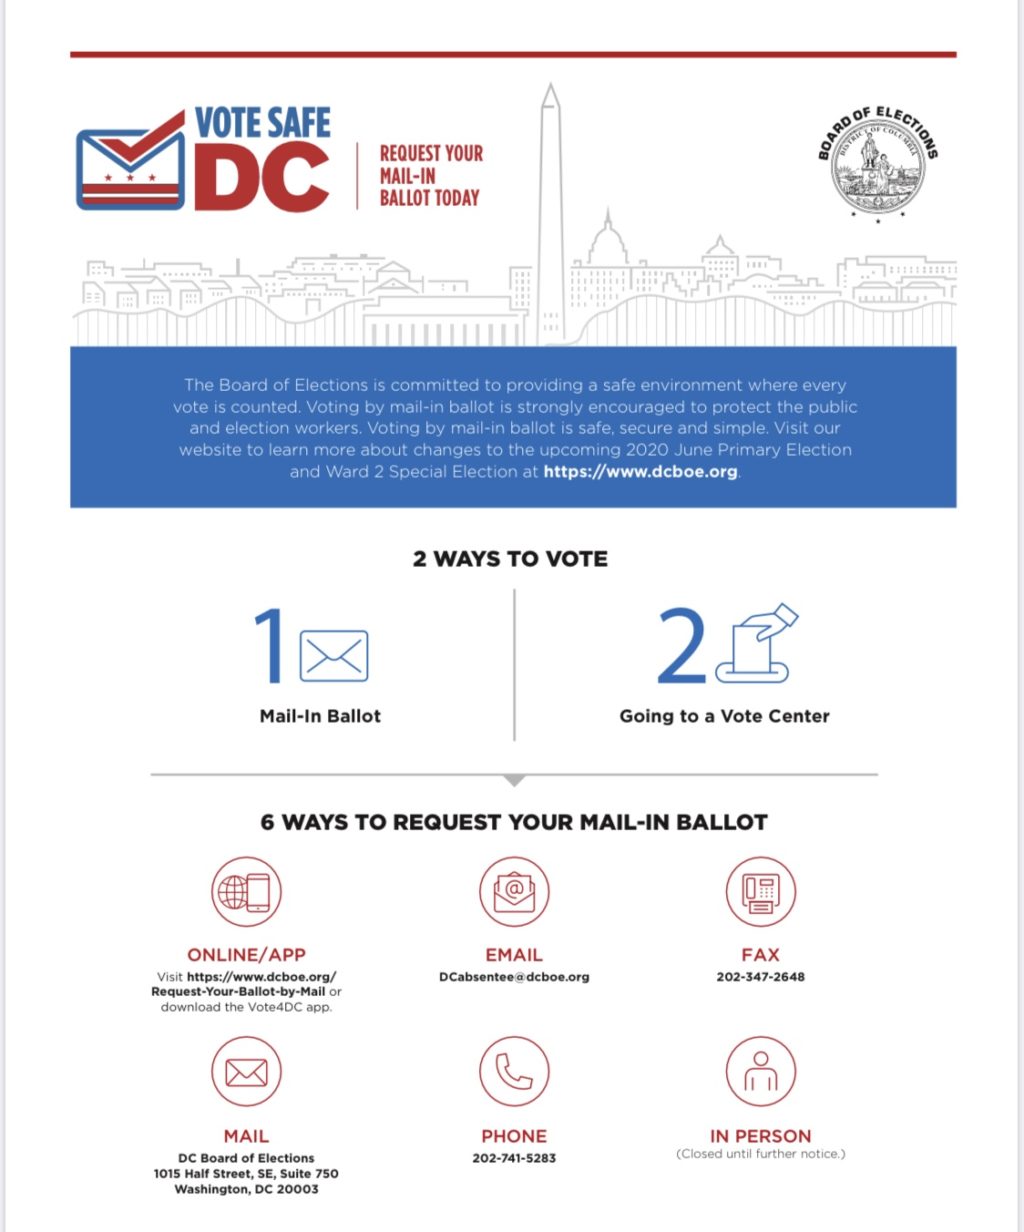 Infographic showing six ways to request a mail-in ballot: online (dcboe.org/request-your-ballot-by-mail) or through the Vote4DC app; email dcabsentee@dcboe.org; fax 202-347-2048; mail DC Board of Elections 1015 Half Street, SE Suite 750, Washingotn, DC 20003; Call 202-741-5283